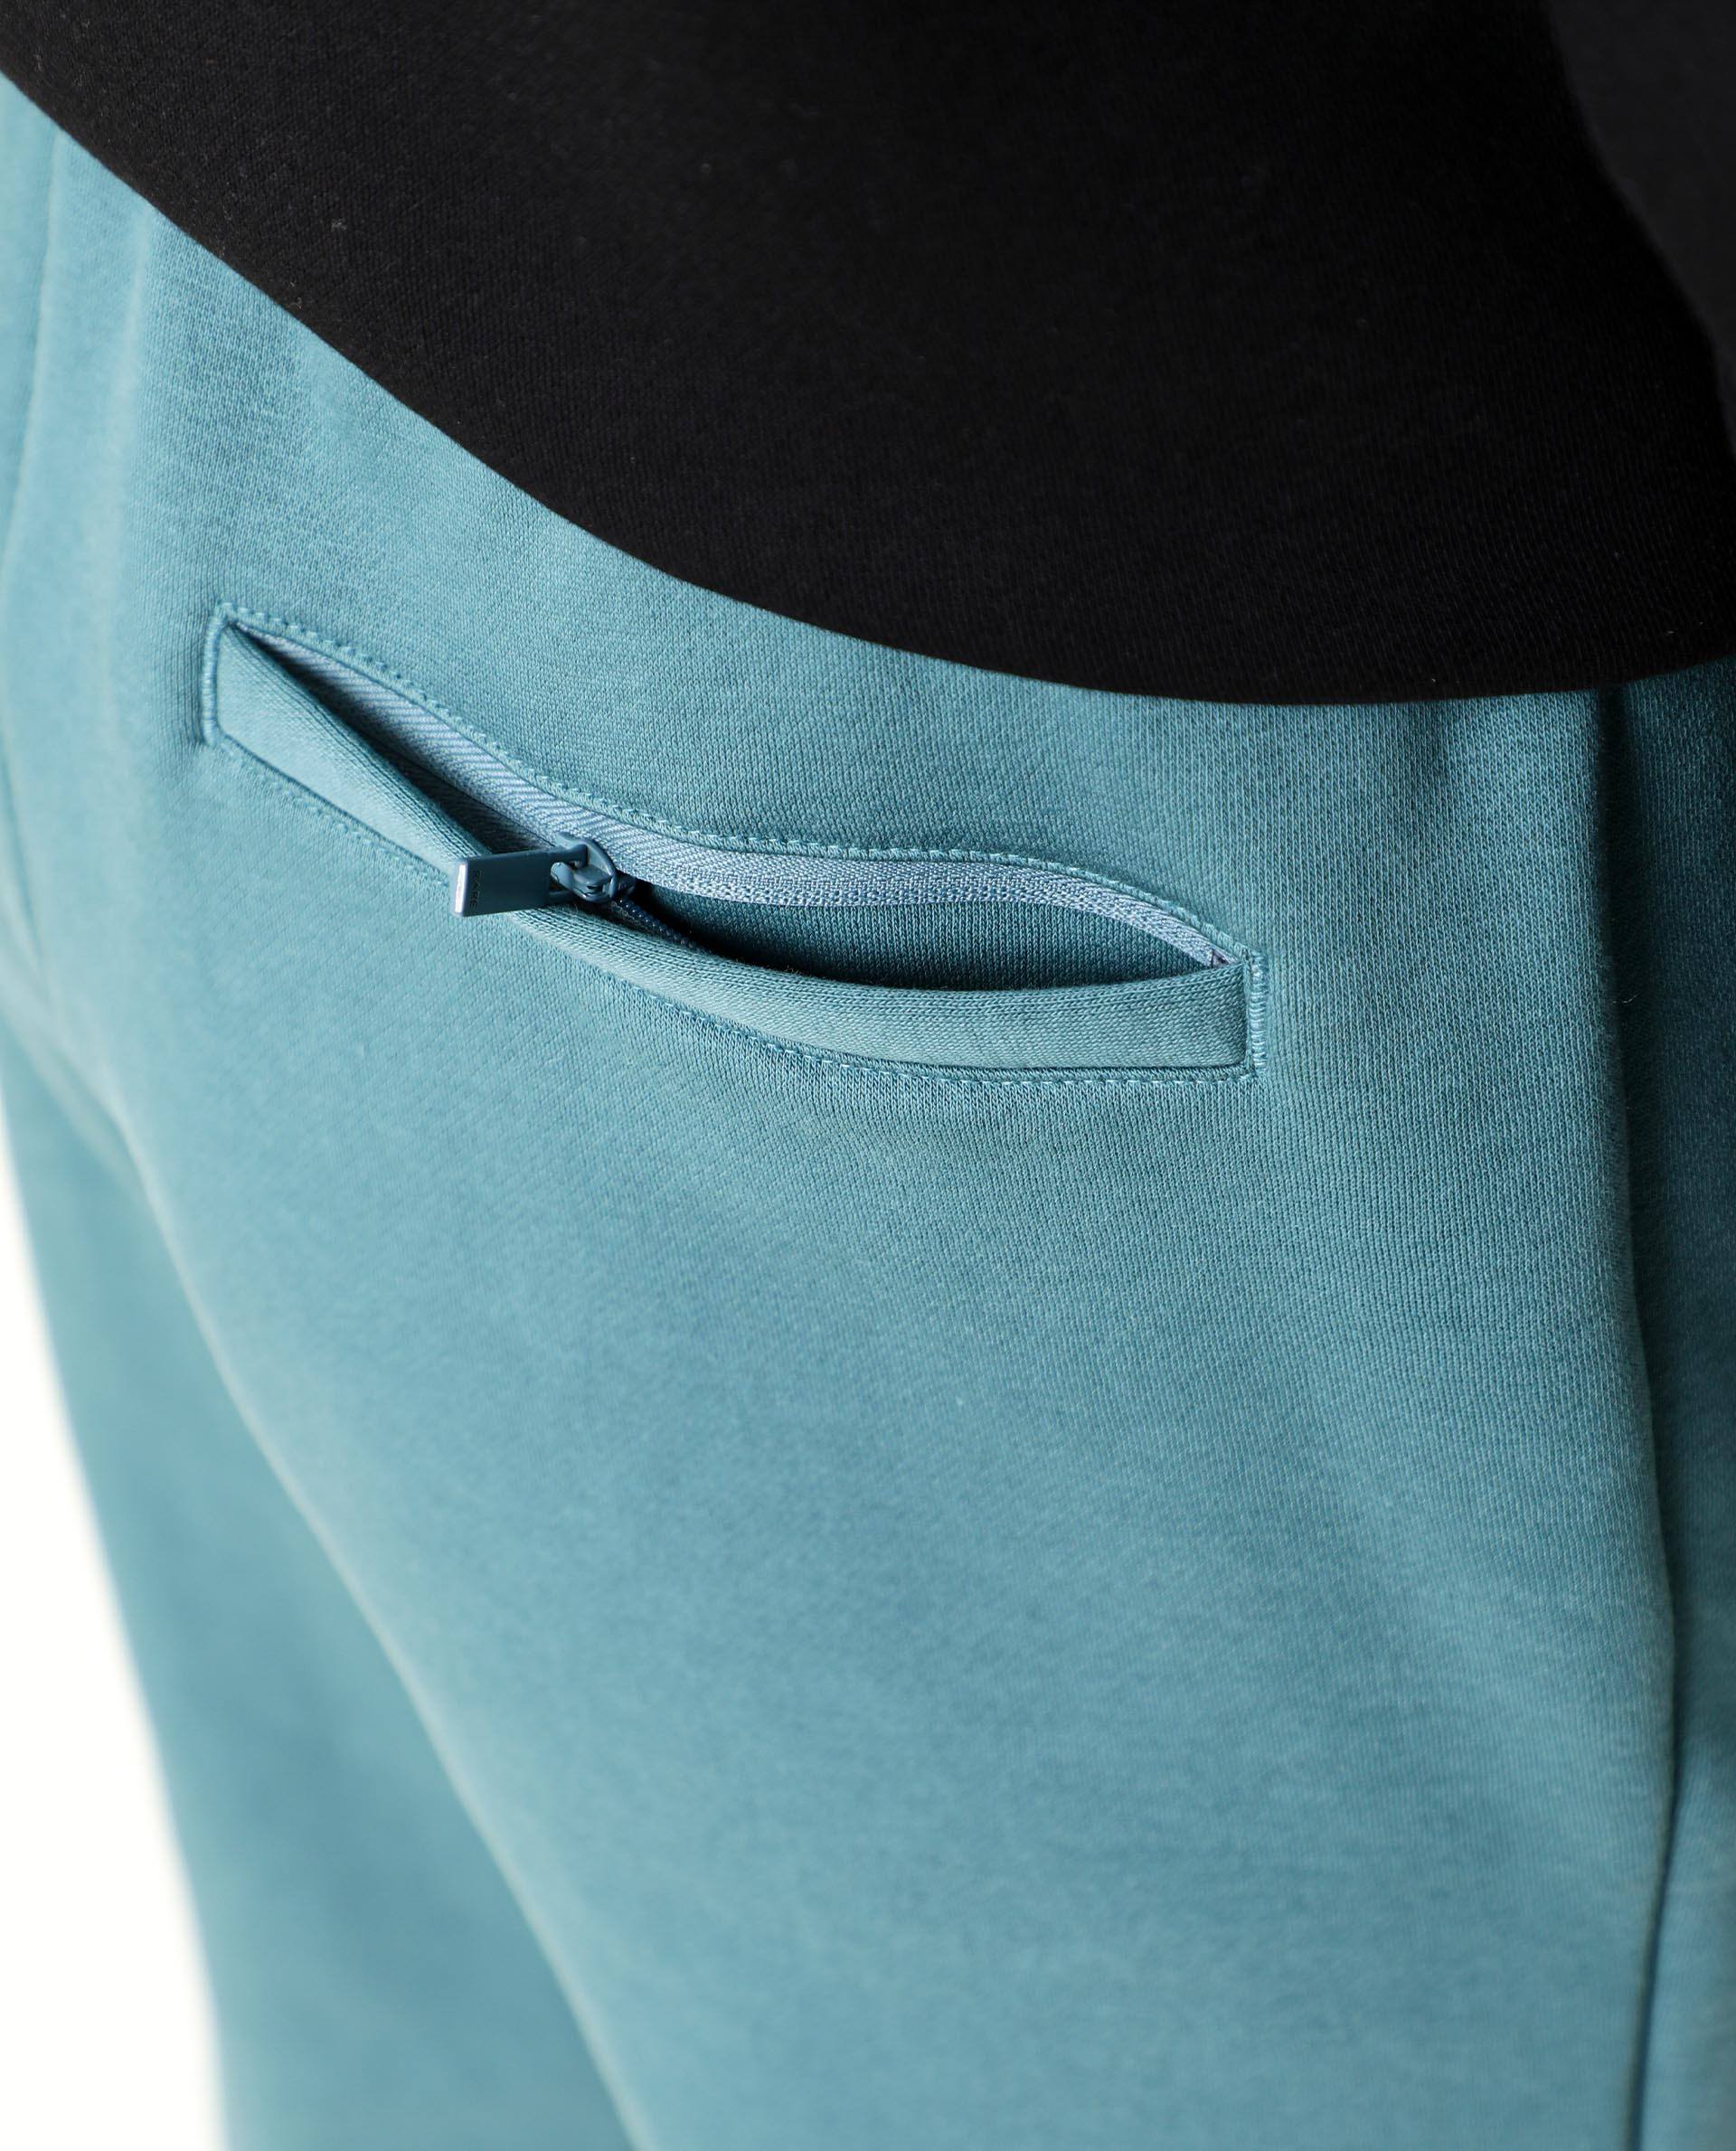 Joe  Jo Turquoise Trouser Pants  Men  Best Price and Reviews  Zulily